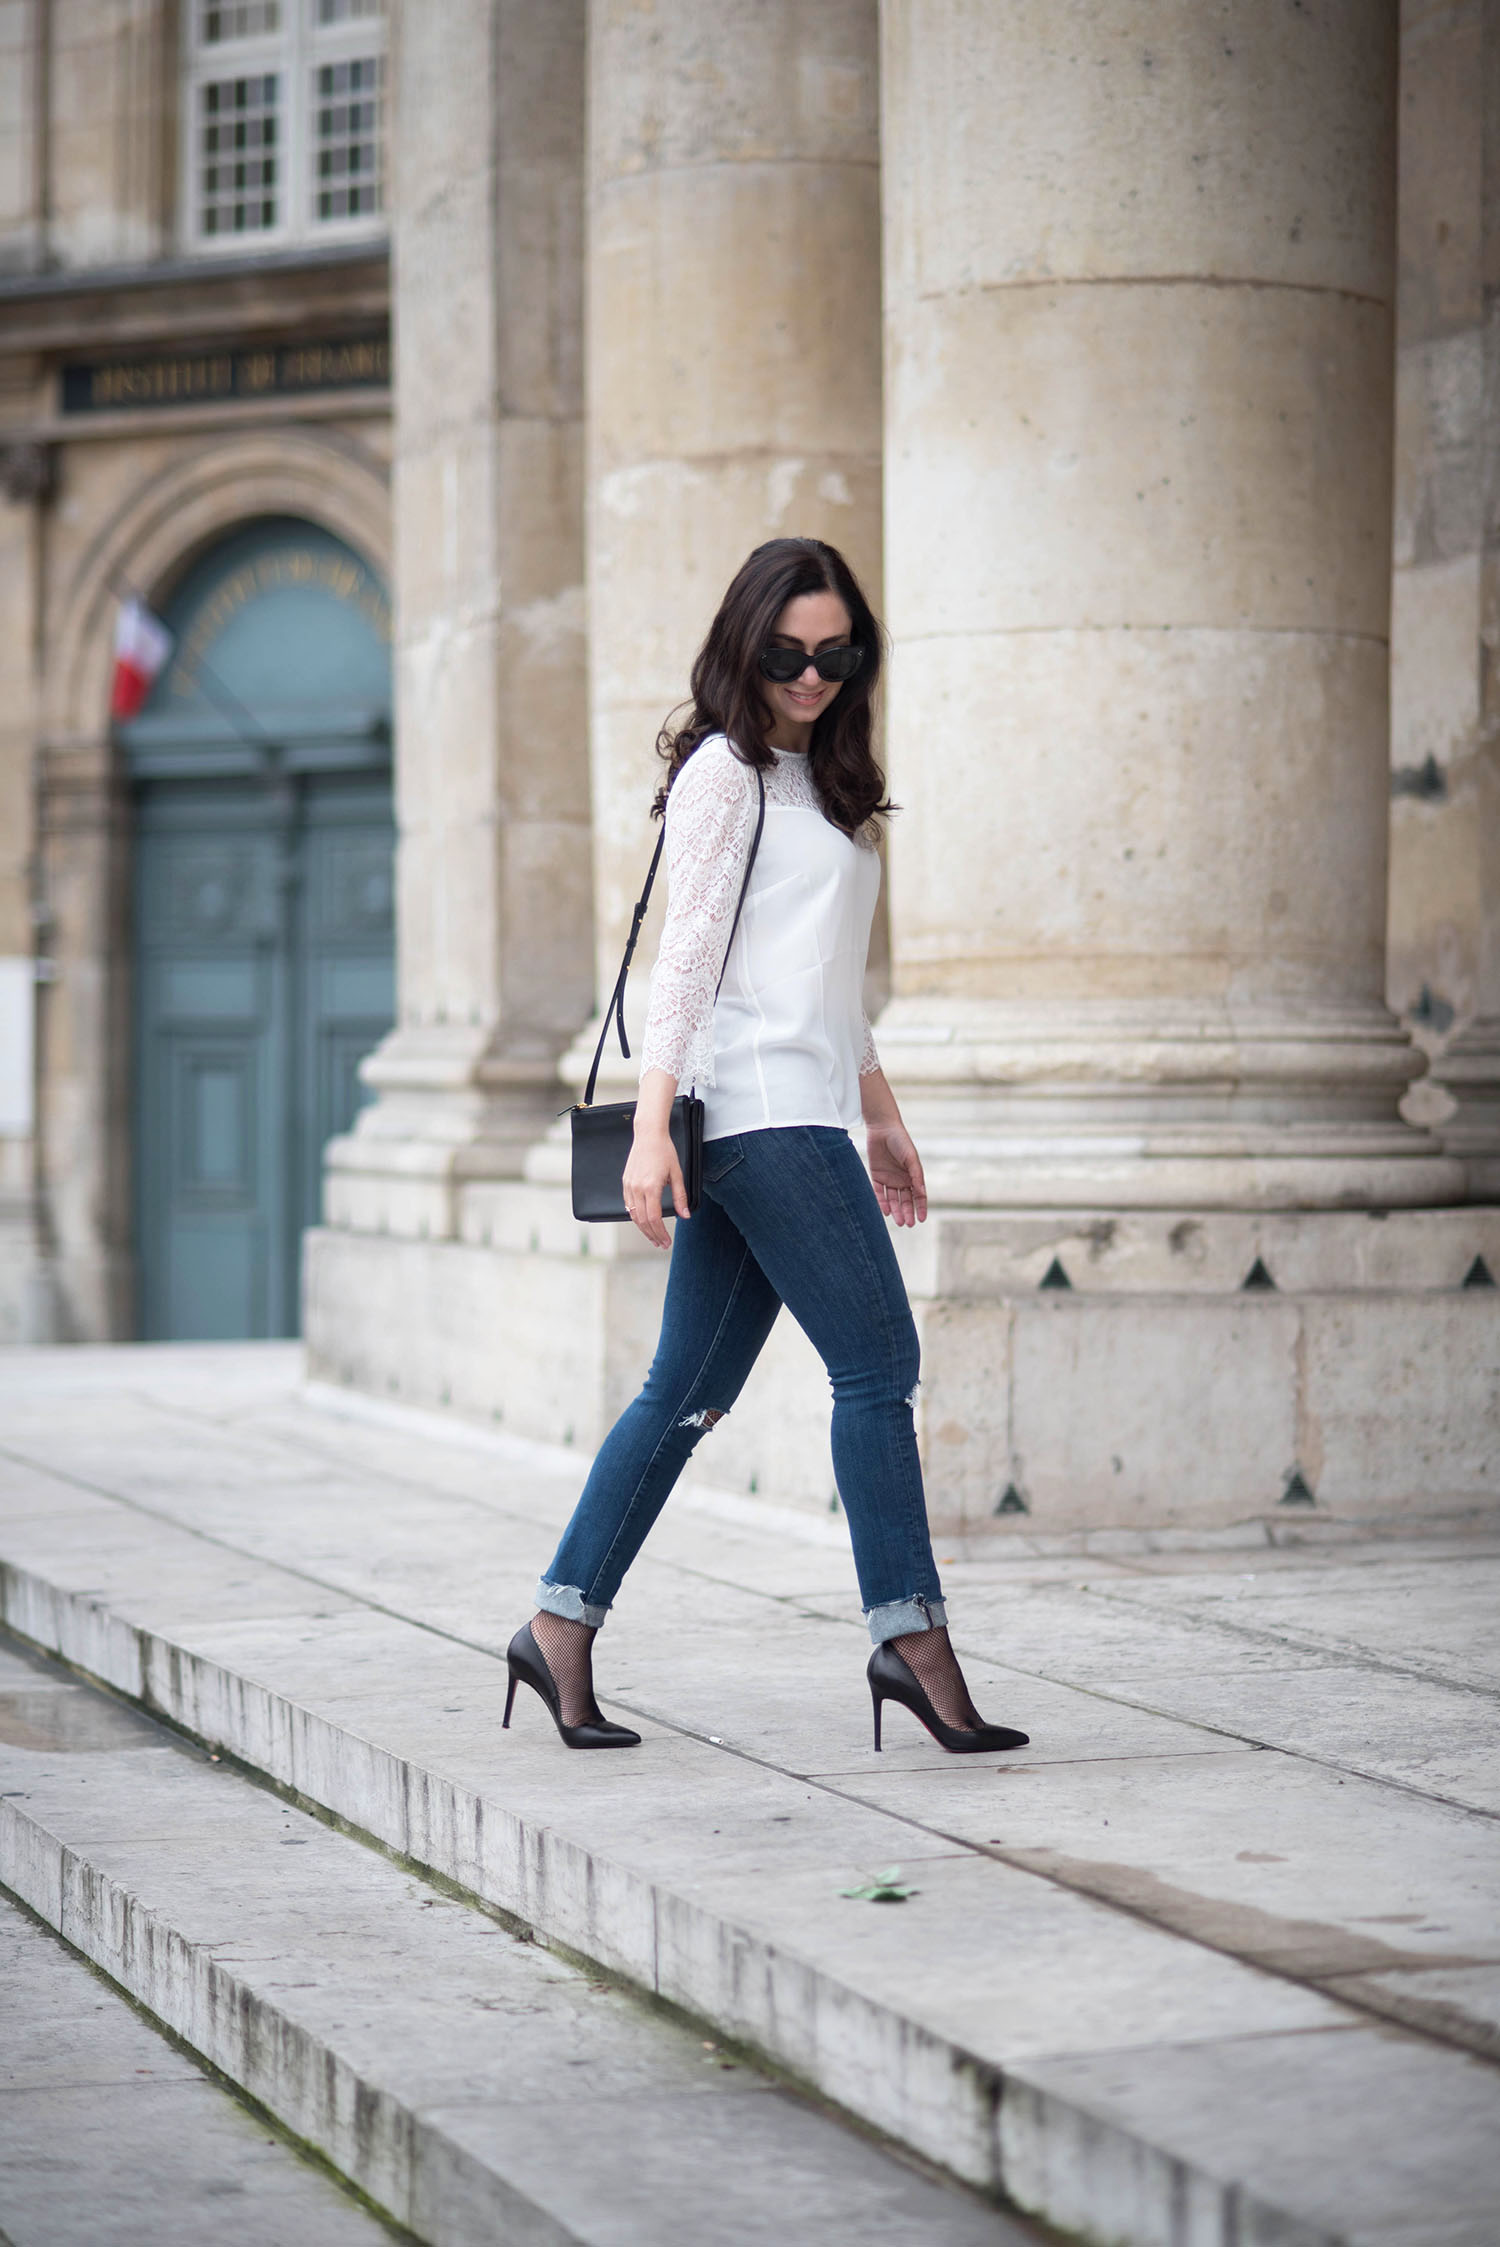 Fashion blogger Cee Fardoe of Coco & Vera walks at the Institut de France wearing Christian Louboutin heels and a Sezane blouse